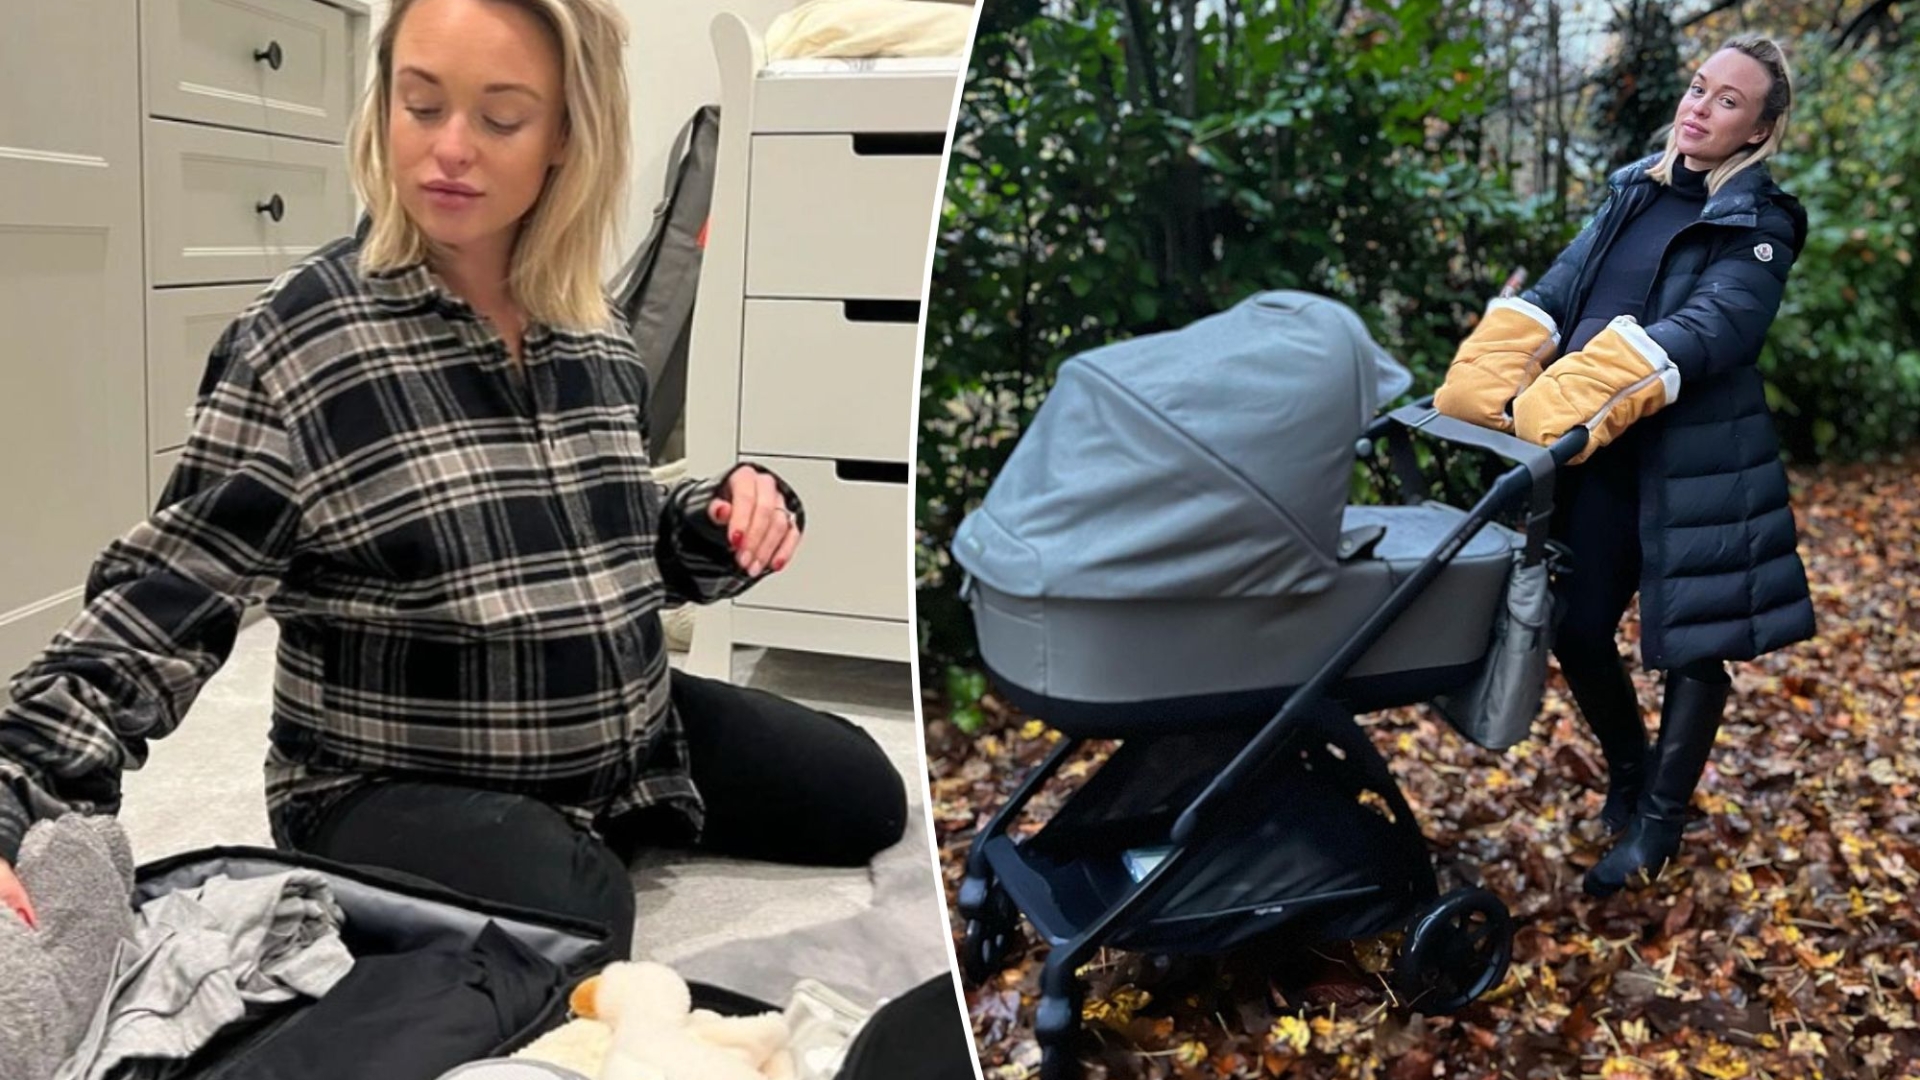 Jorgie Porter proudly shows off her growing bump. This sparks speculation that she may have given birth.